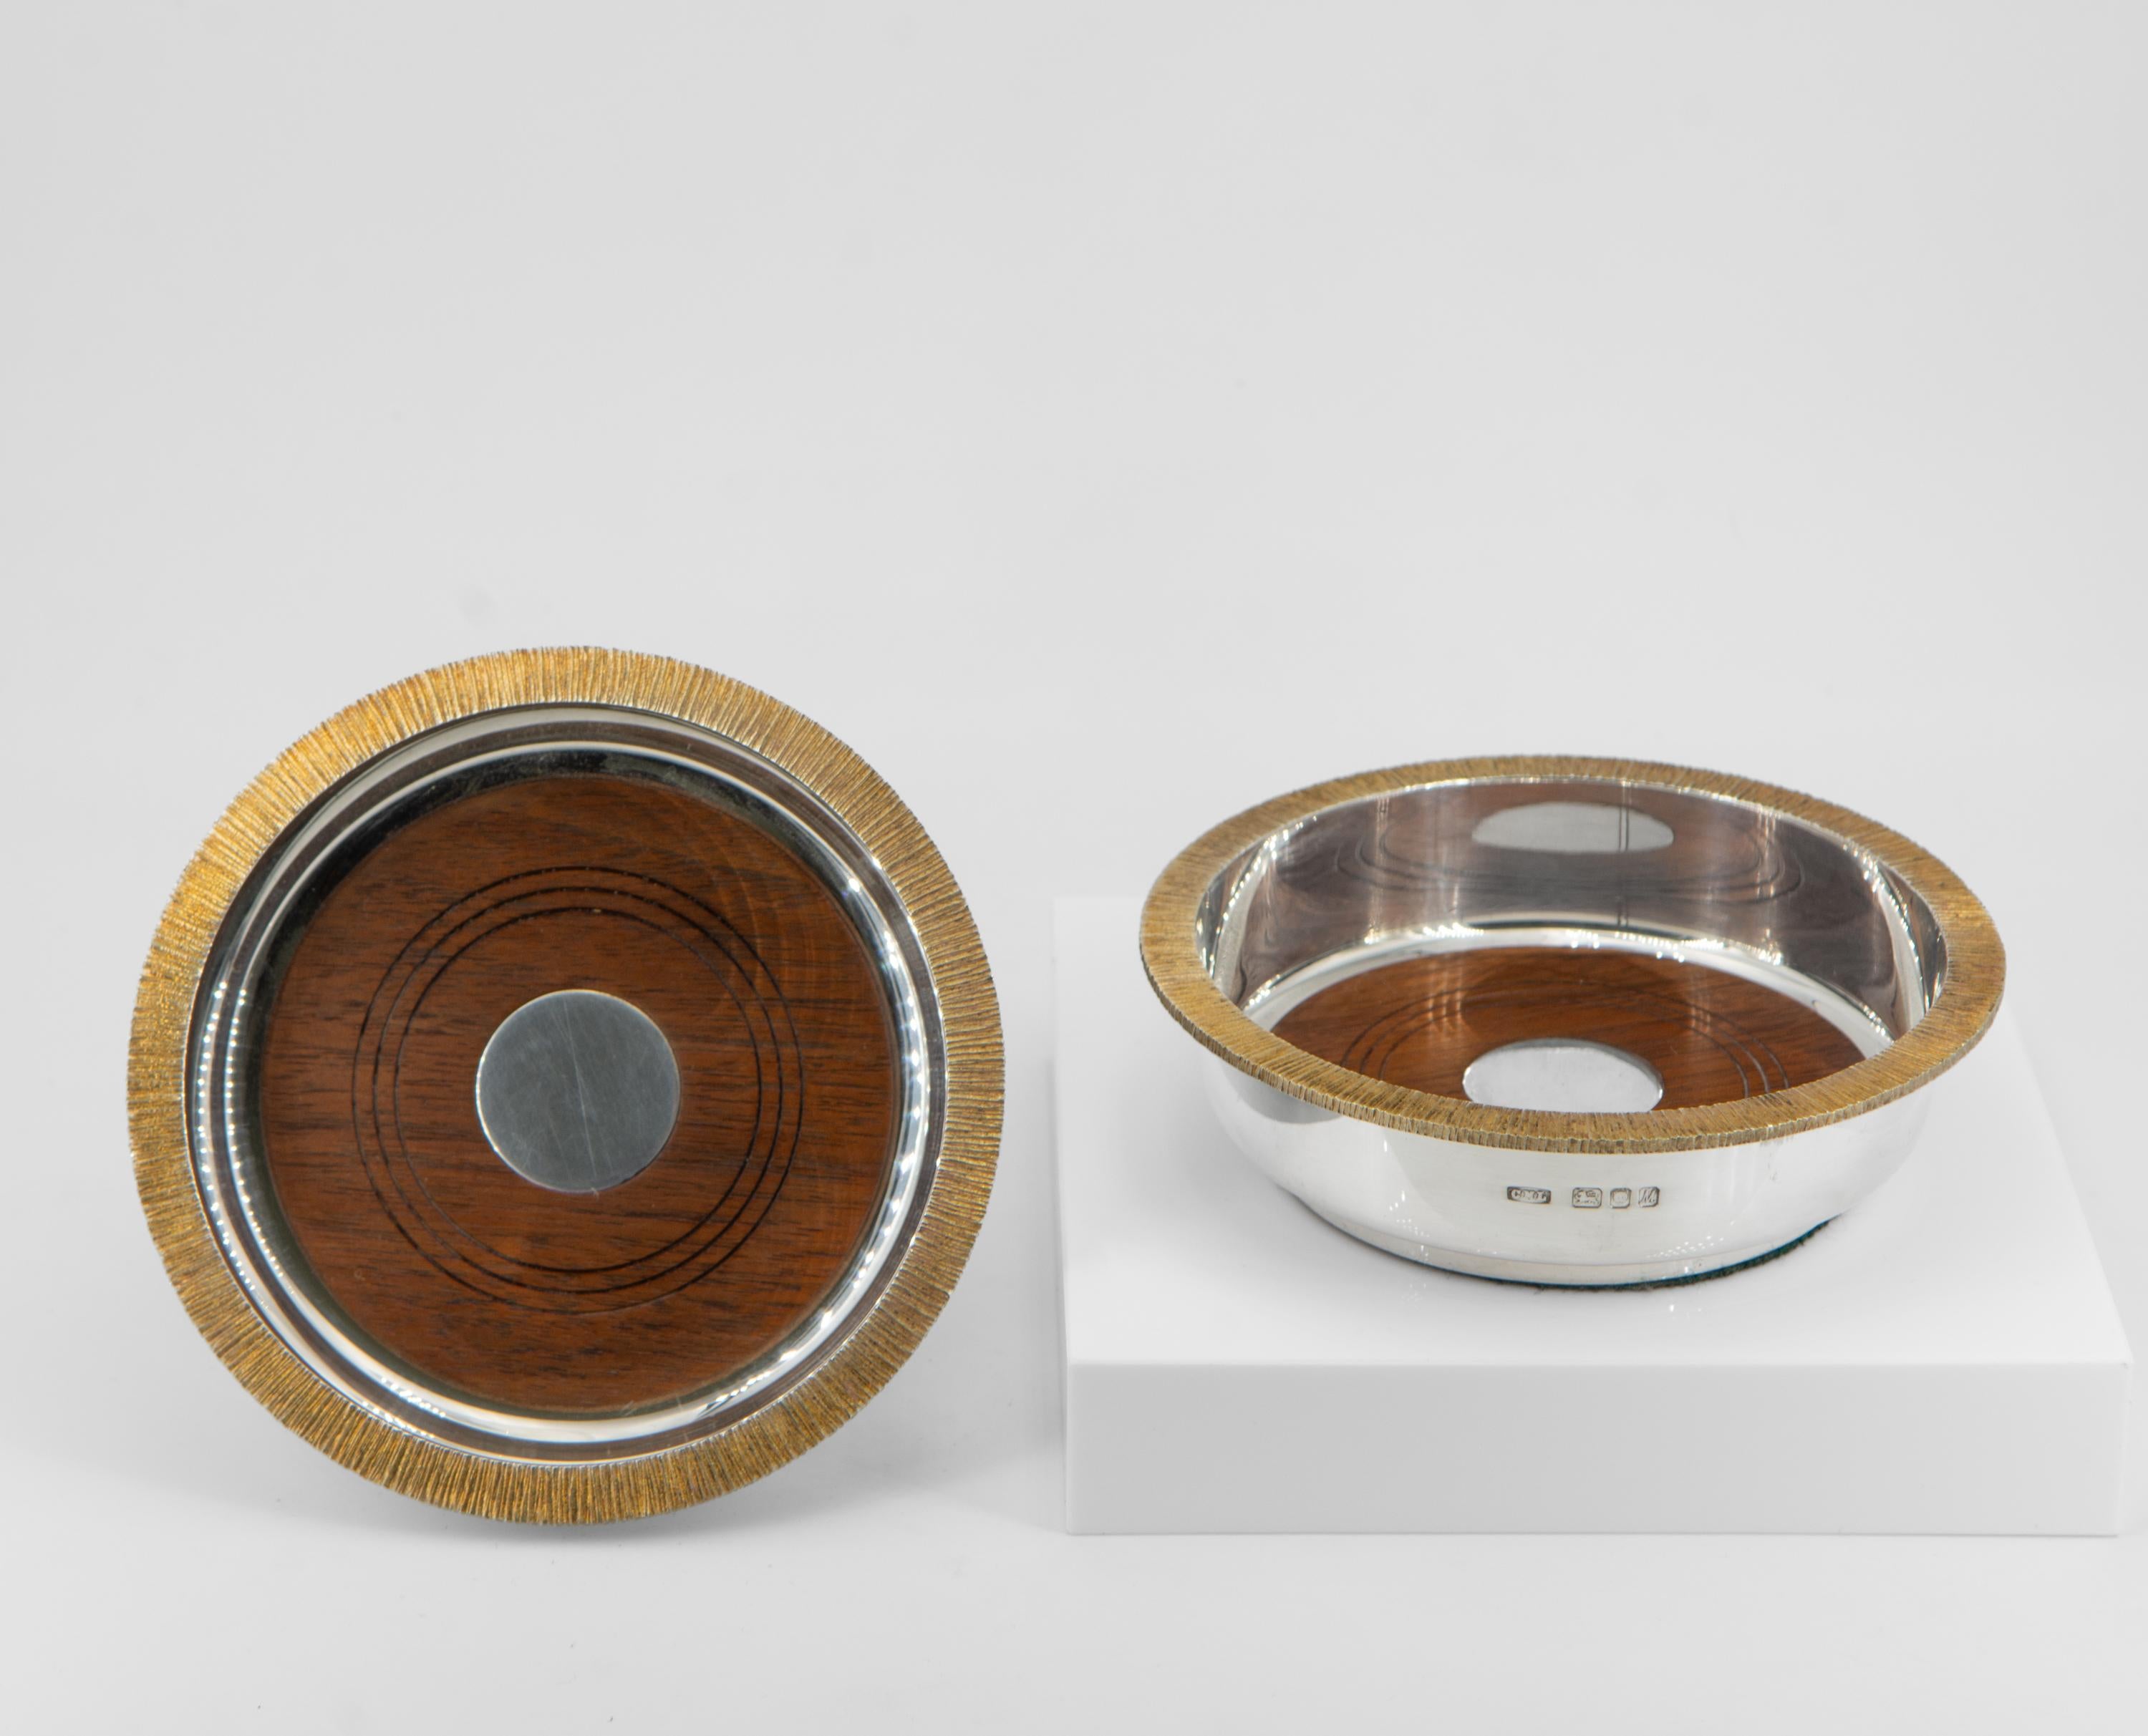 Pair Elizabeth II Modernist sterling silver & silver gilt limited edition wine coasters, London 1986 by Christopher Nigel Lawrence.  

The coasters are of circular form with contrasting naturalistic silver gilt 'bark' textured edge and inset turned